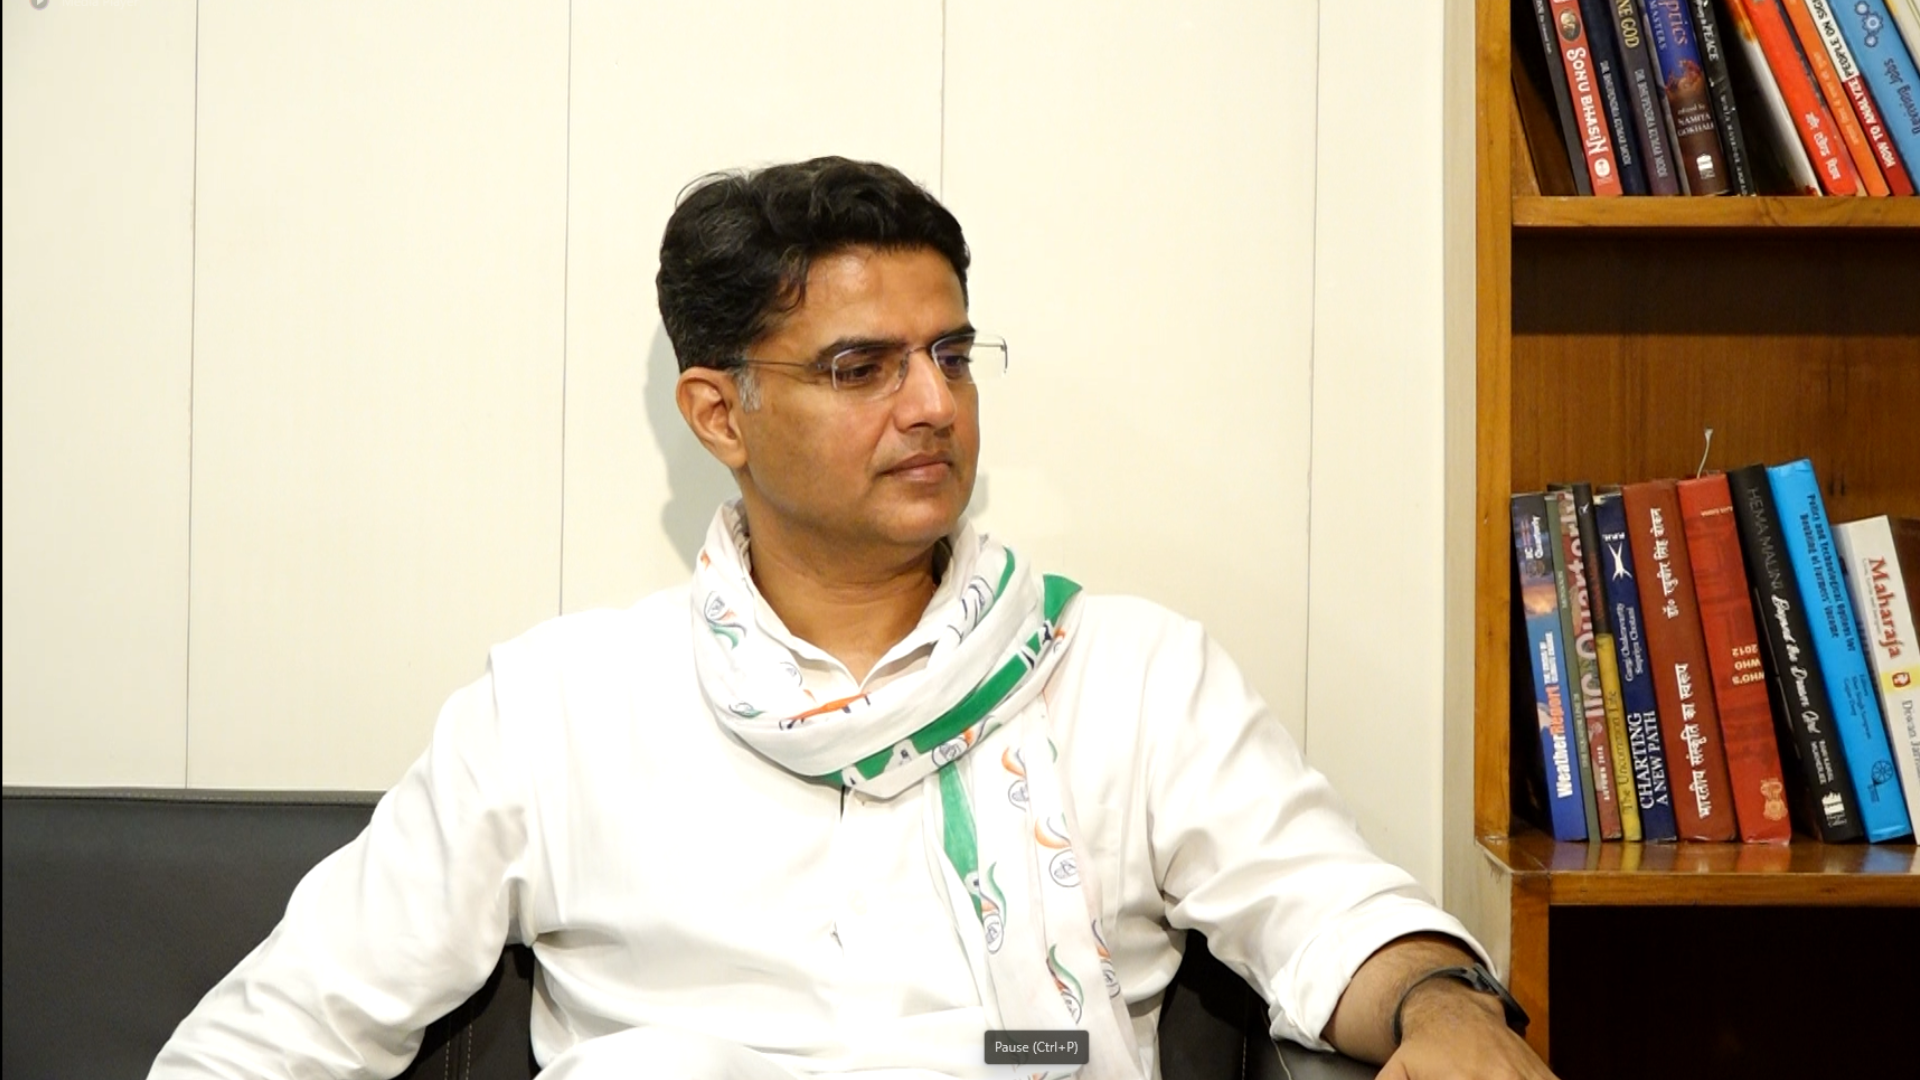 NewsX Exclusive: Sachin Pilot Unravels Why He’s Loyal to Congress